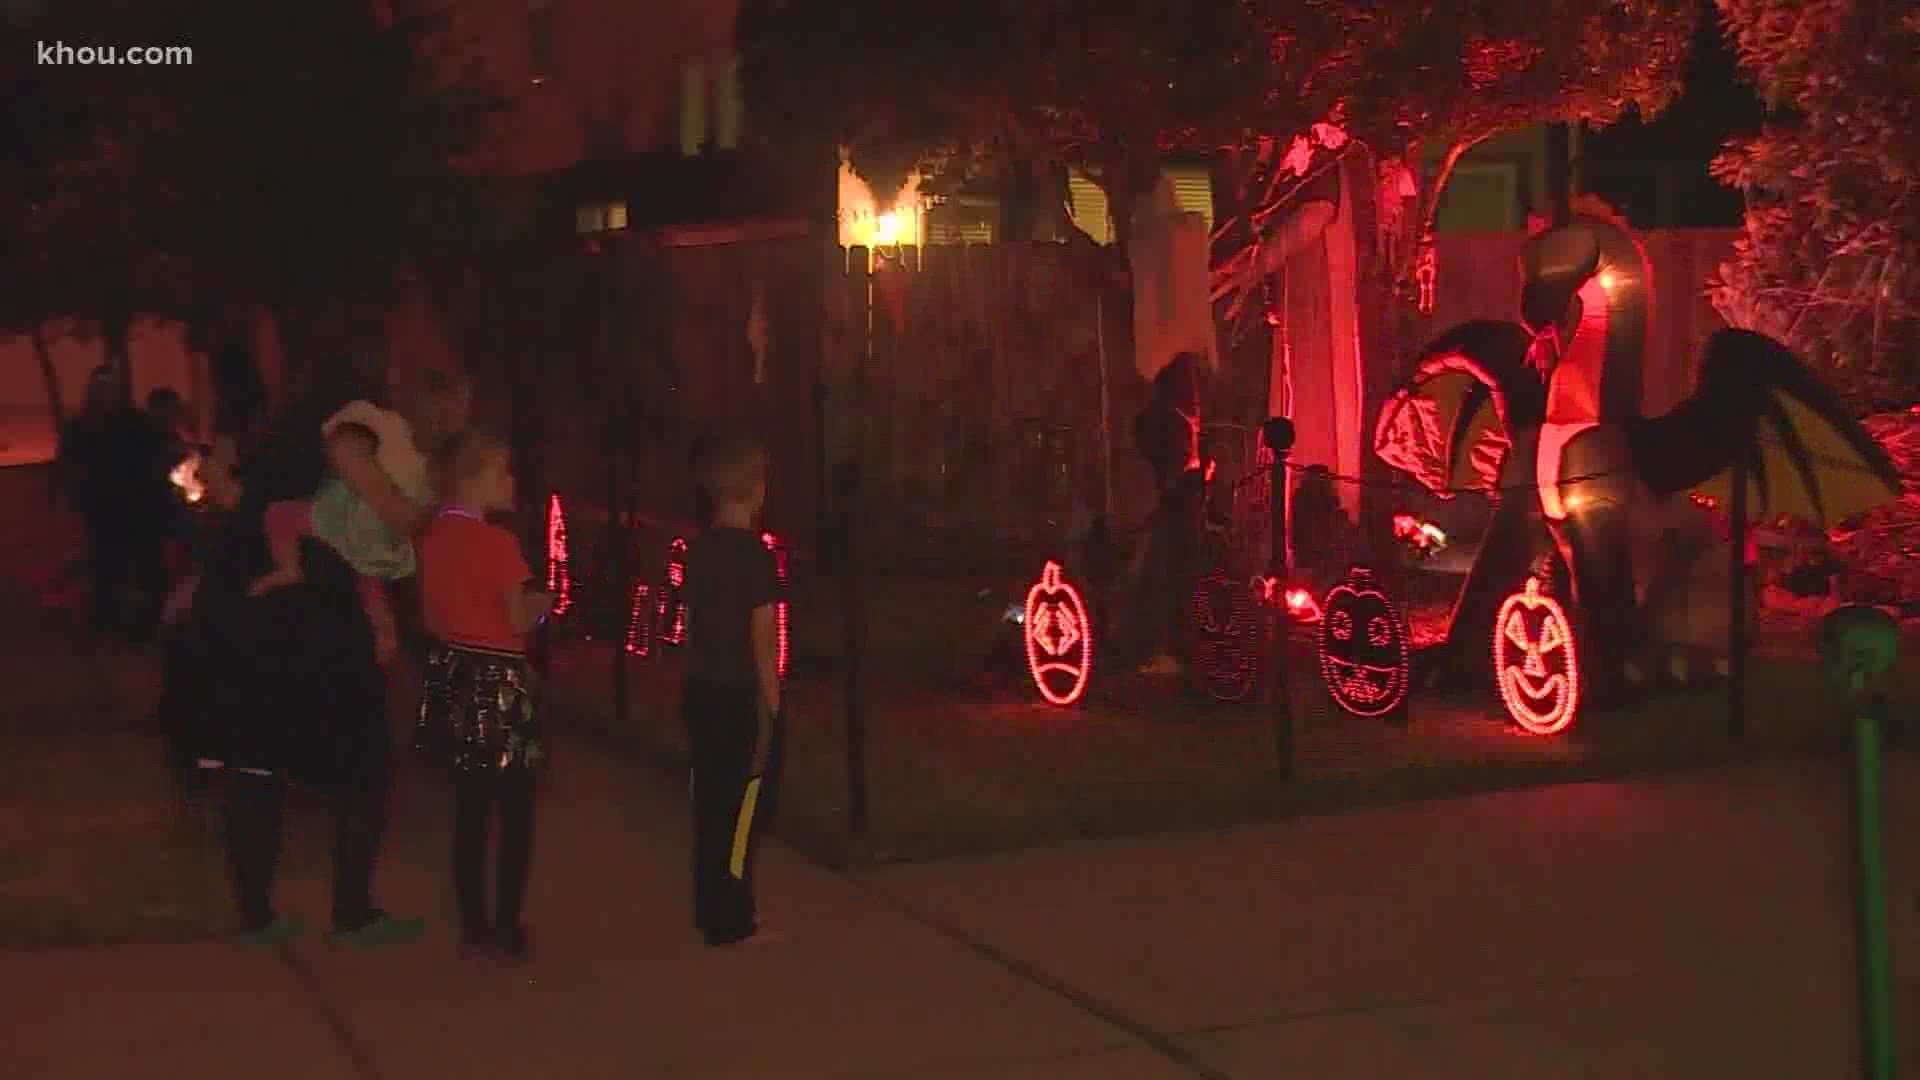 A Richmond family is getting in the Halloween spirit with a spectacular light display that attracts many viewers.